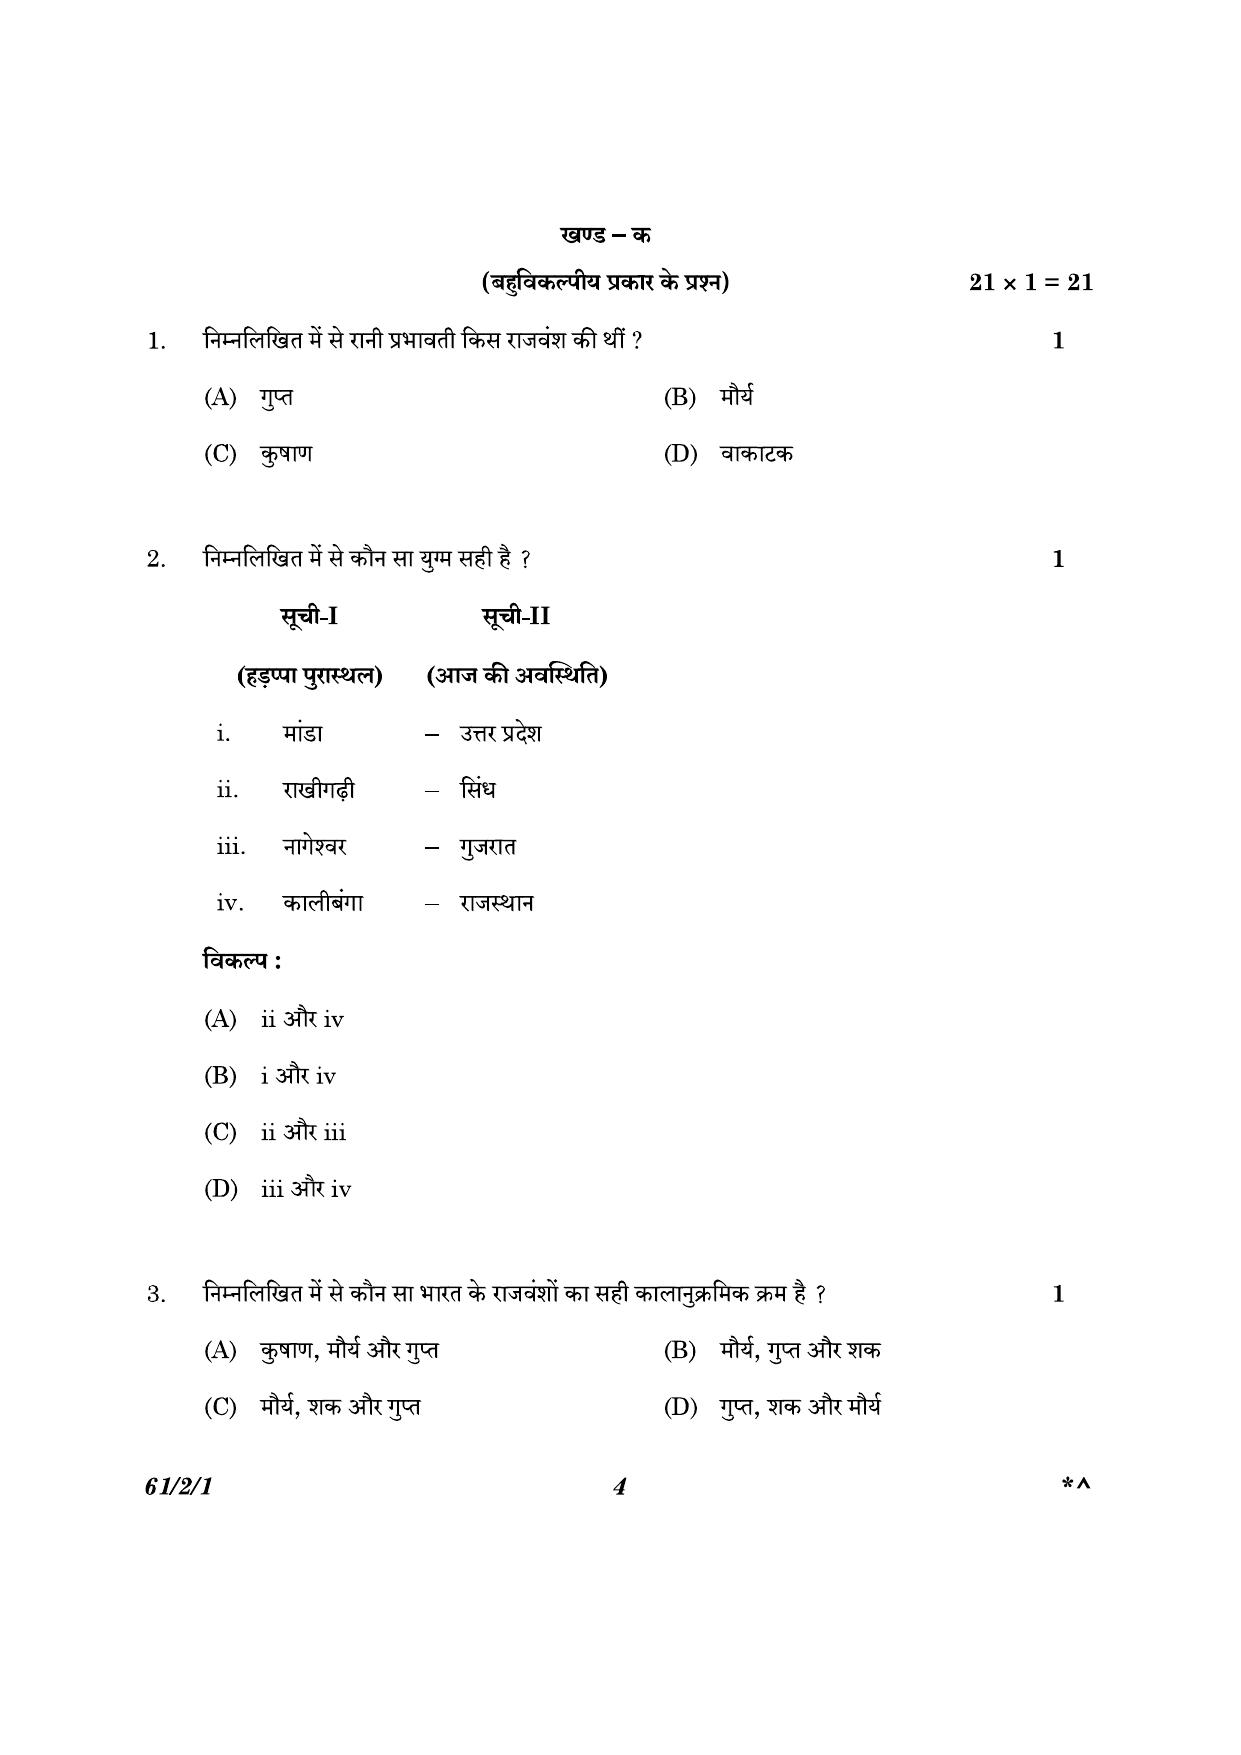 CBSE Class 12 61-2-1 History 2023 Question Paper - Page 4